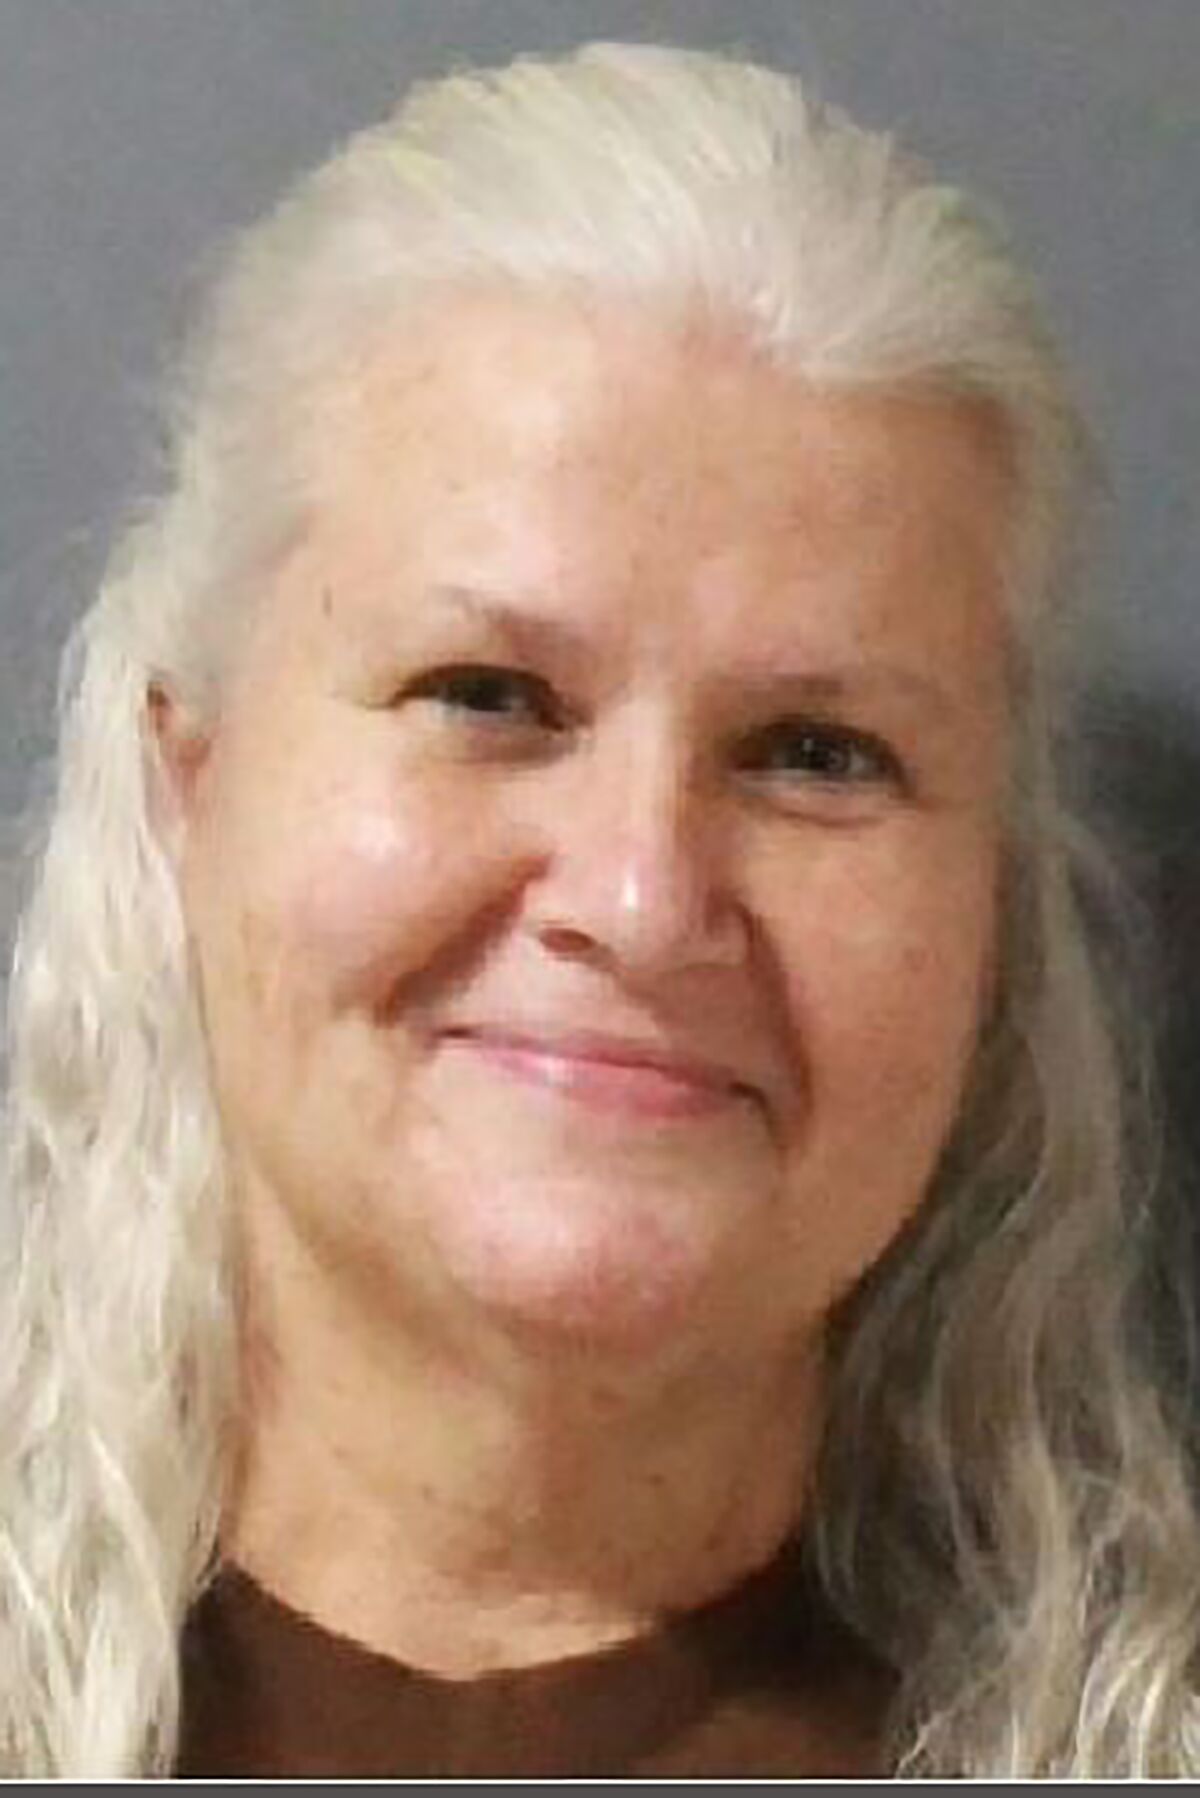 This undated photo provided by the Steele County, Minn., Jail shows Lois Riess. Riess a Minnesota woman who pleaded guilty to fatally shooting a woman in Florida so she could assume her identity has been returned to her home state to face trial on allegations that she killed her husband in 2018. Lois Riess is being held at the Steele County Detention Center in Owatonna, Minn., on charges of first- and second-degree murder. She's accused of fatally shooting David Riess at their home in Blooming Prairie in March 2018. (Steele County Jail via AP)